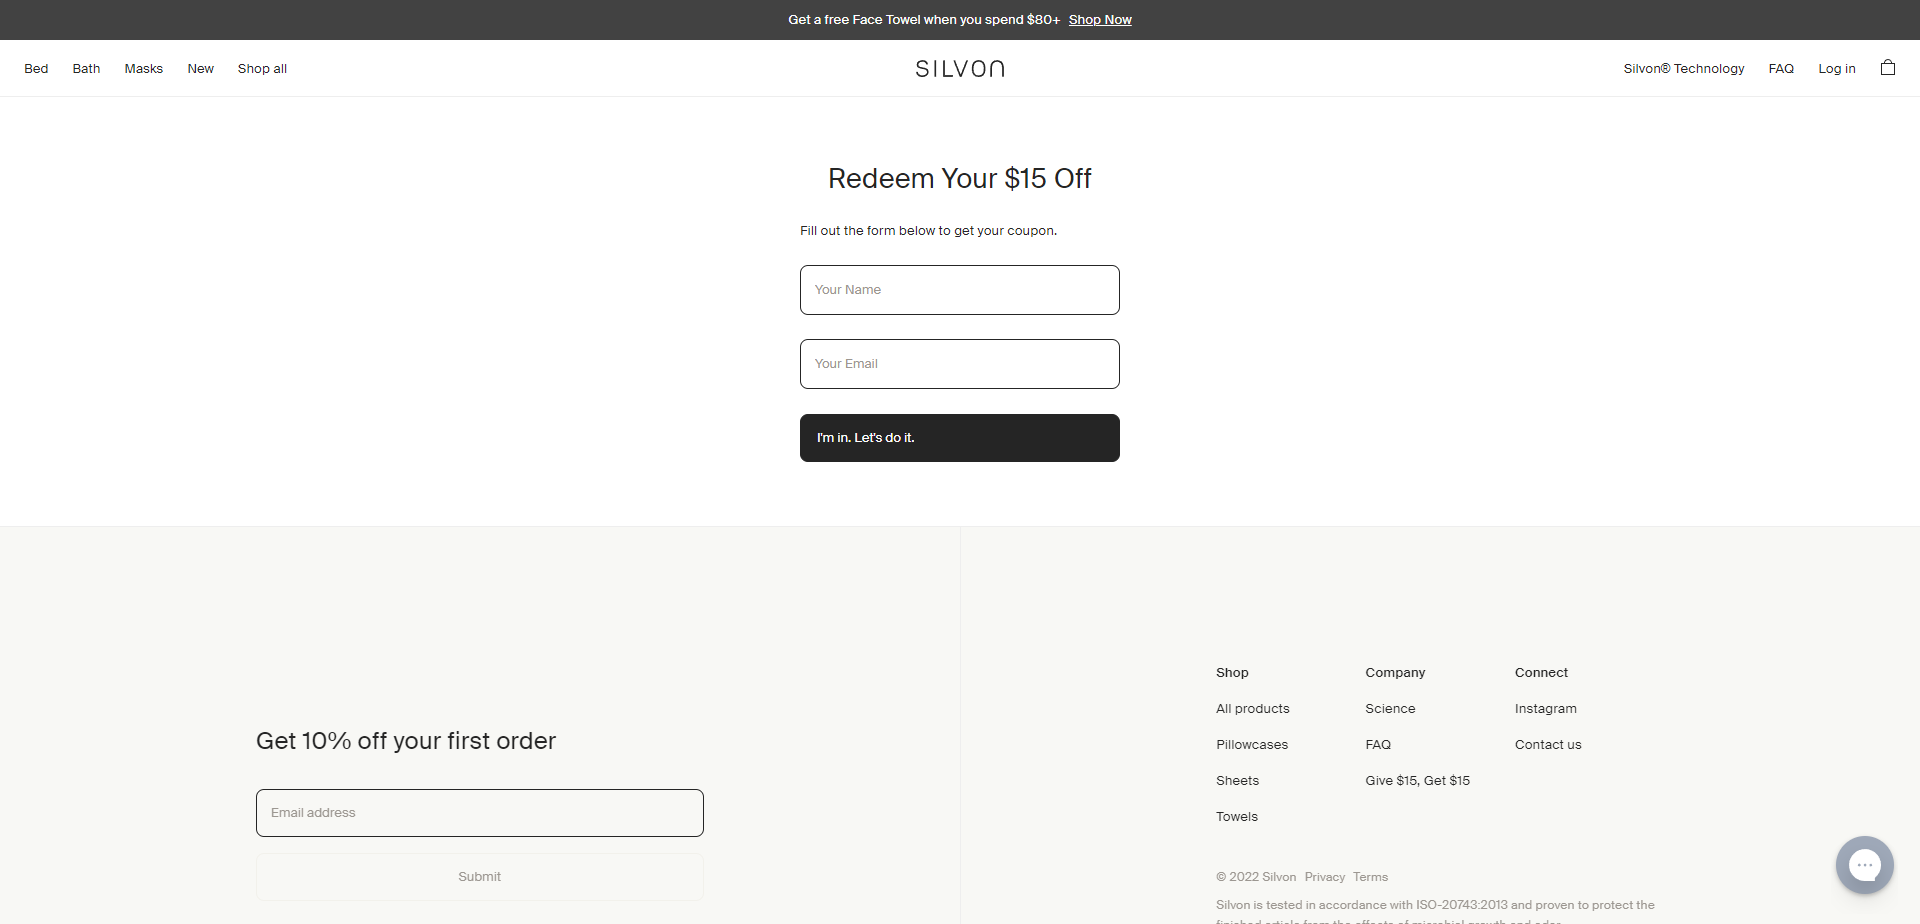 Referral Landing Page for Silvon